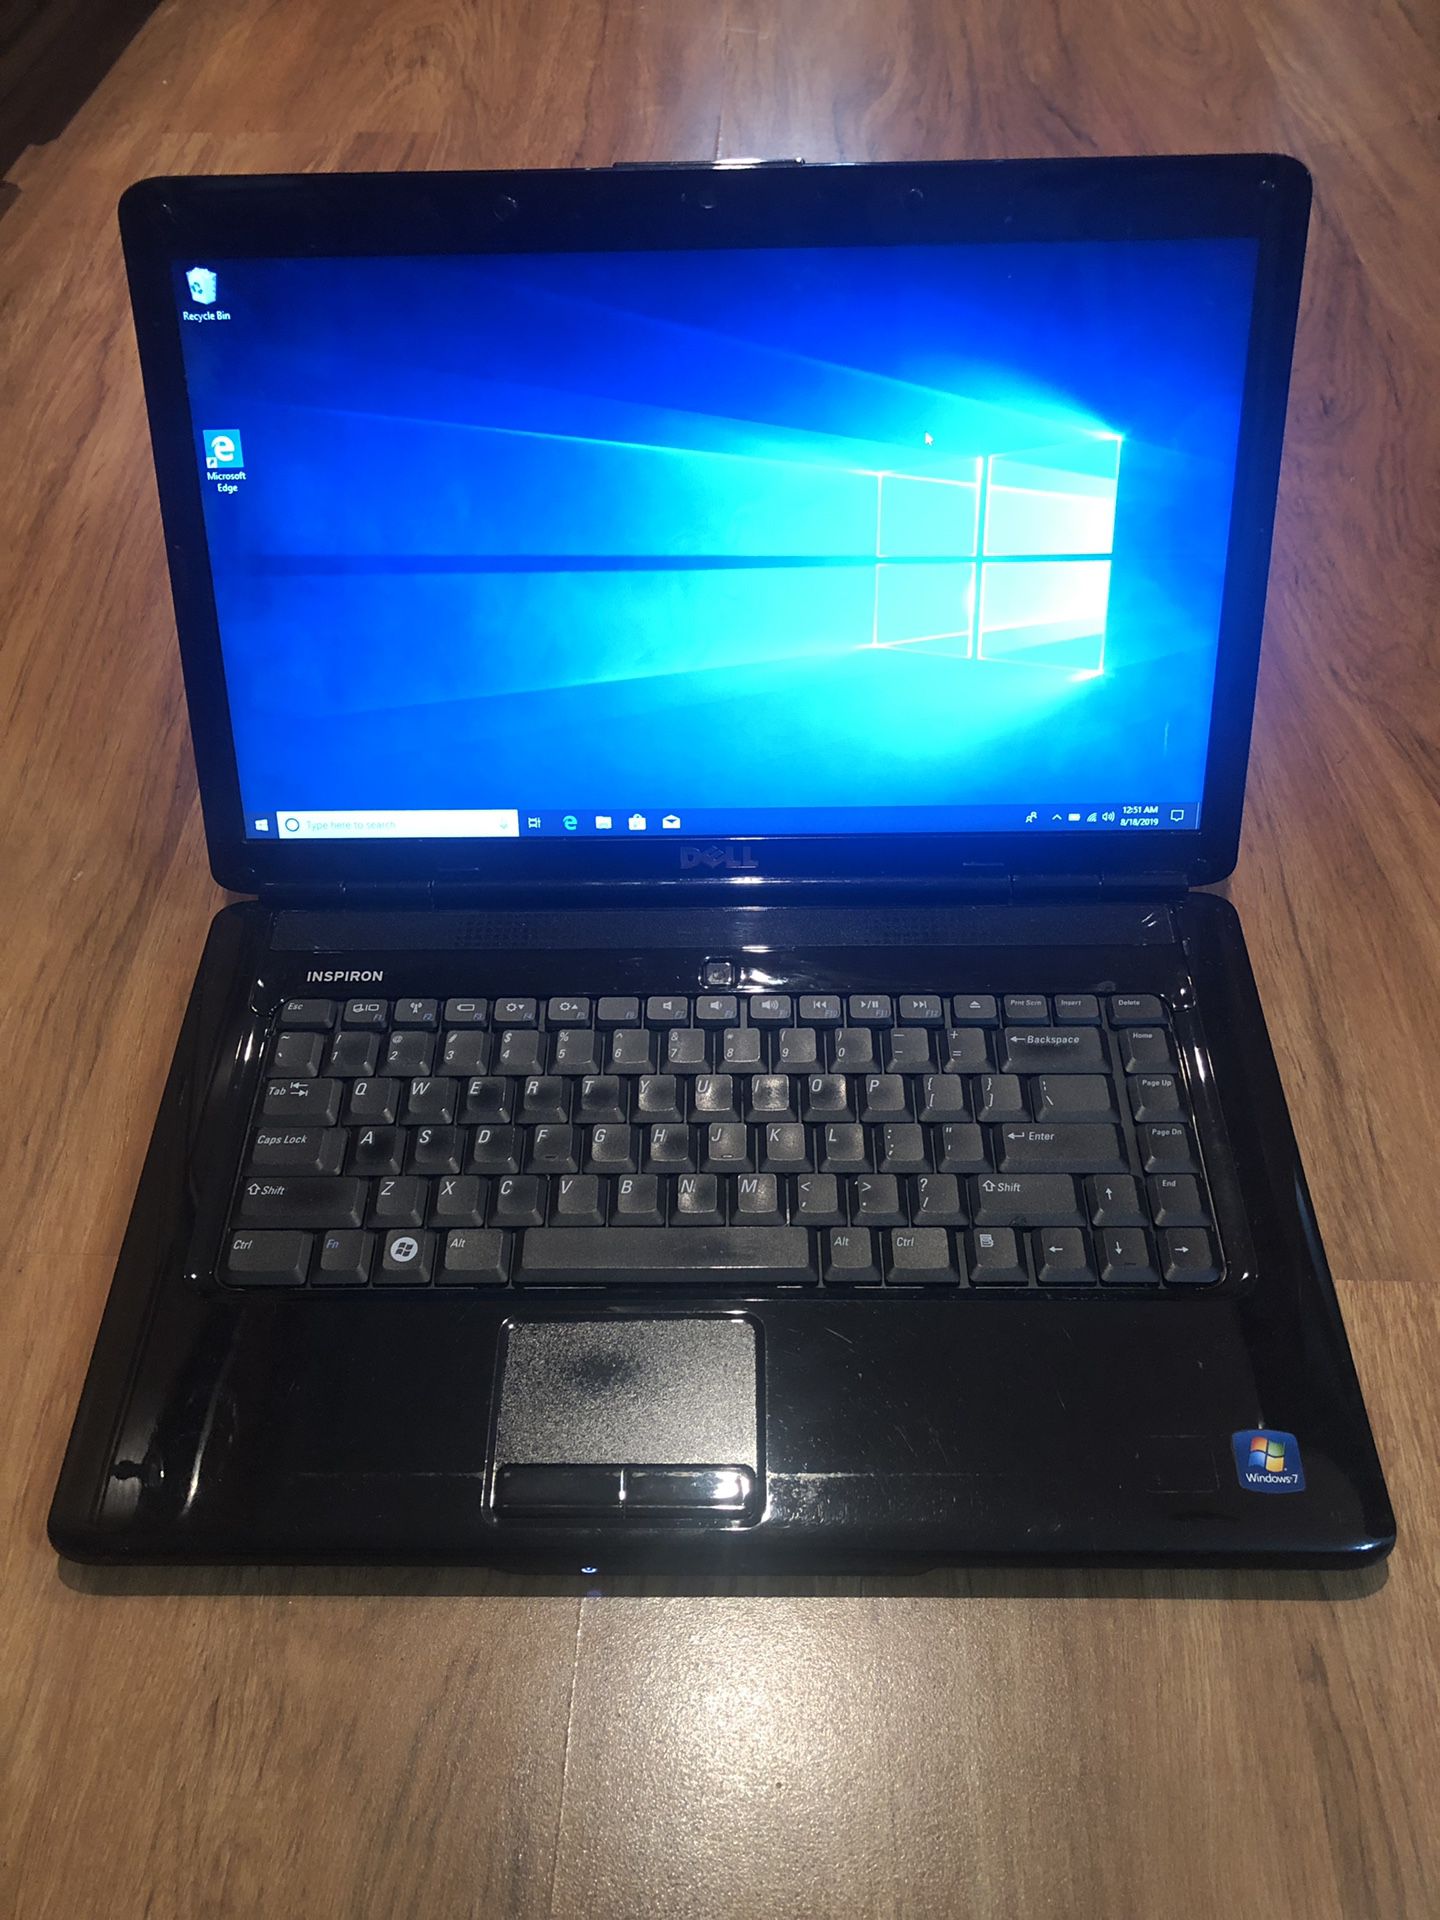 Dell Inspiron 1545 4GB Ram 160GB Hard Drive 15.6 inch Windows 10 Pro Laptop with charger in Excellent Working condition!!!!!!!!